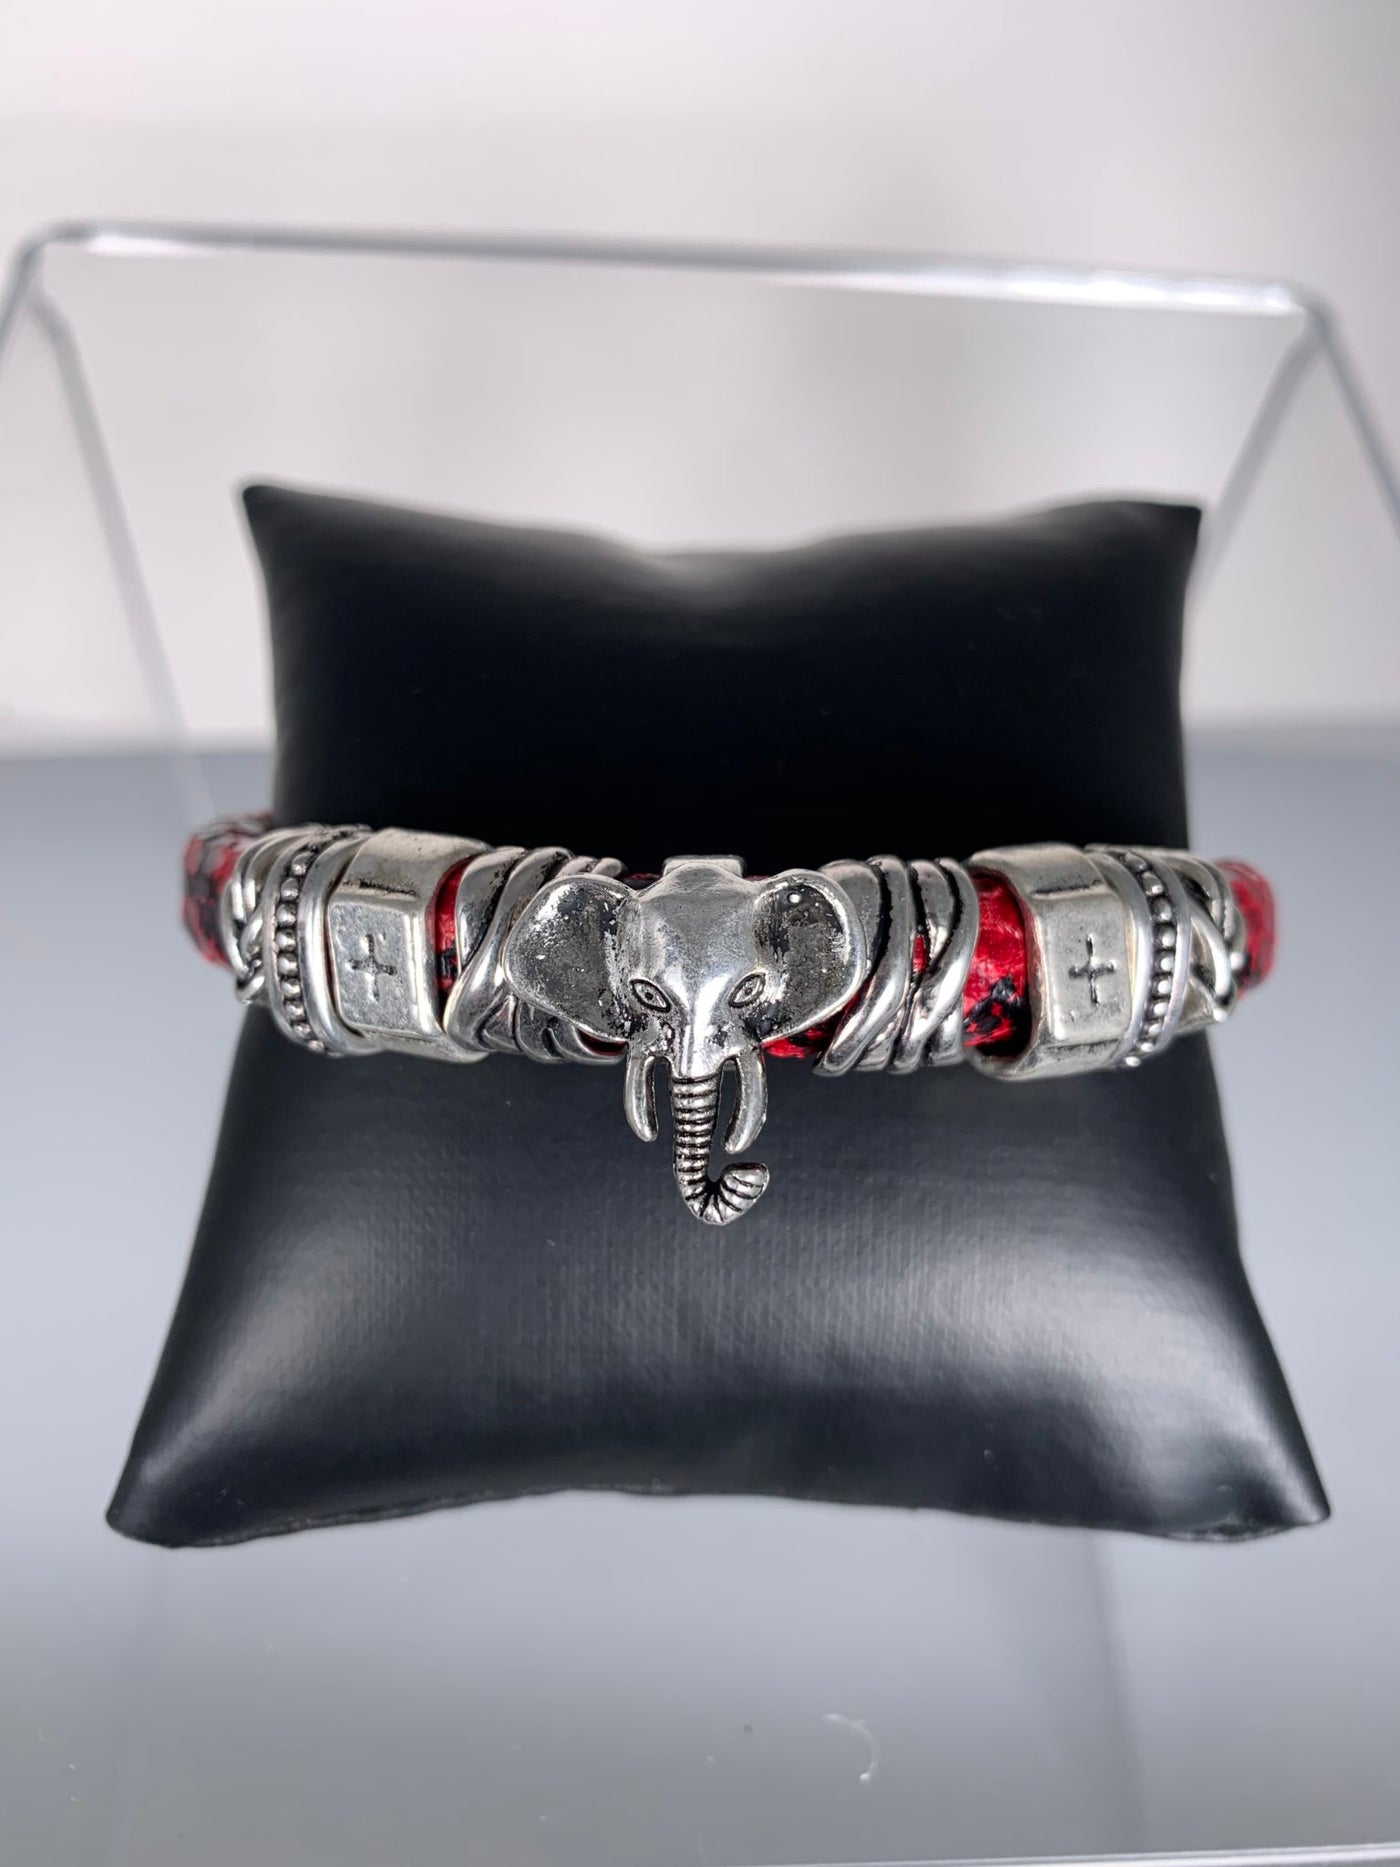 Red Faux Snake Skin Band Bracelet Featuring an Elephant Motif